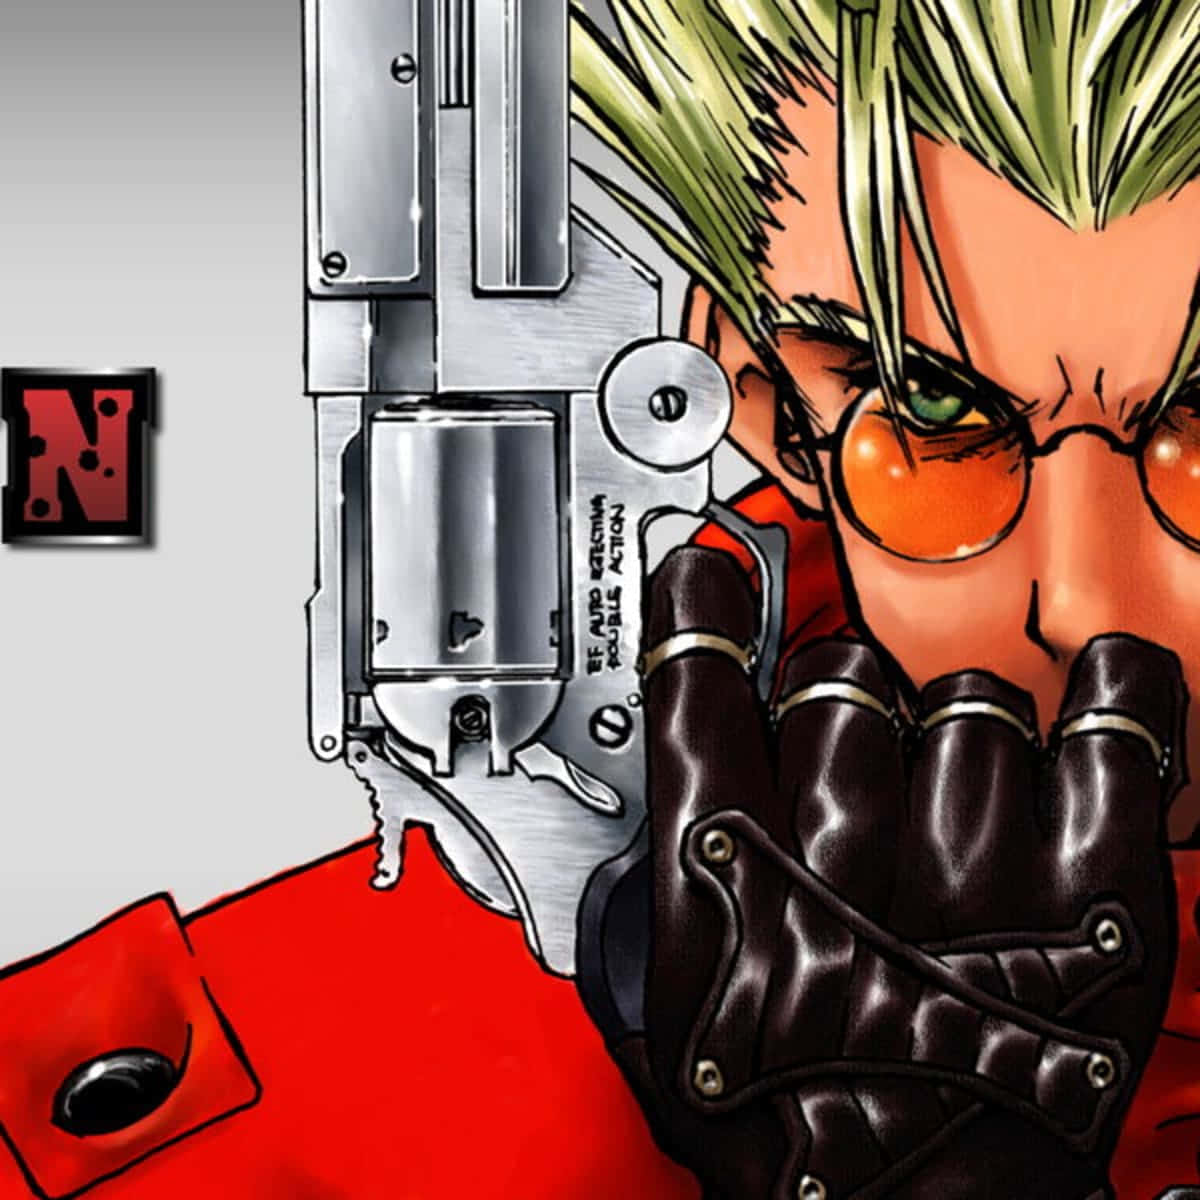 "Fight the future with Vash the Stampede!"